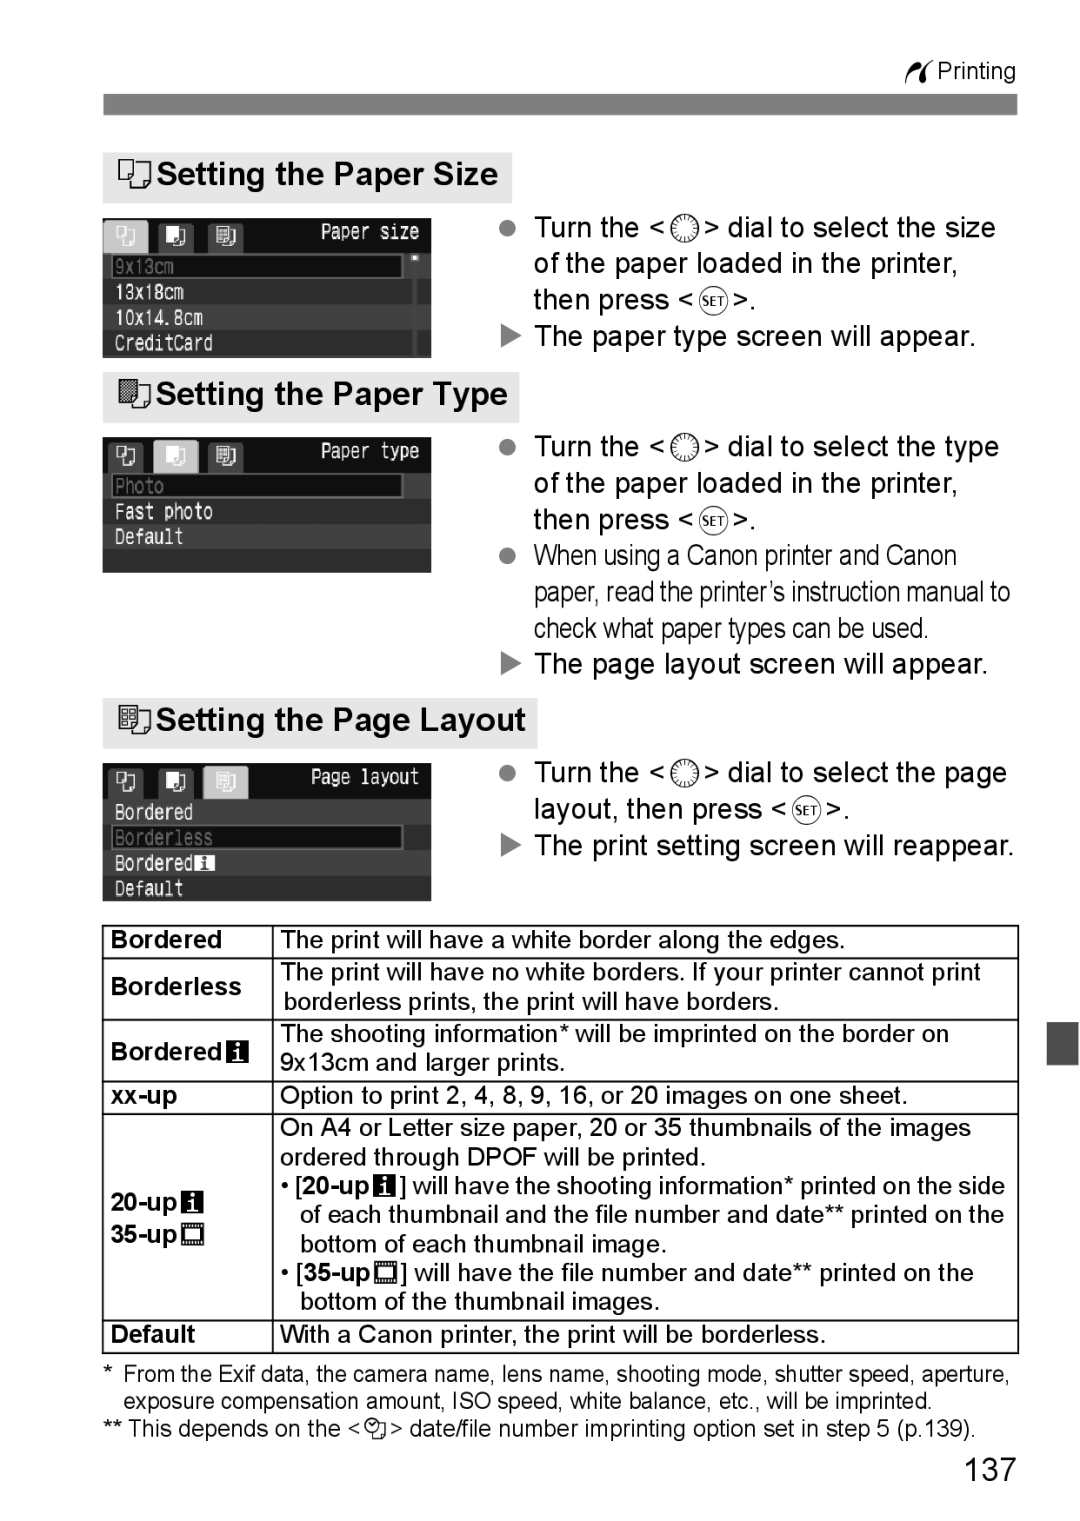 Canon EOS40D QSetting the Paper Size, YSetting the Paper Type, USetting the Page Layout, 137, Layout, then press 